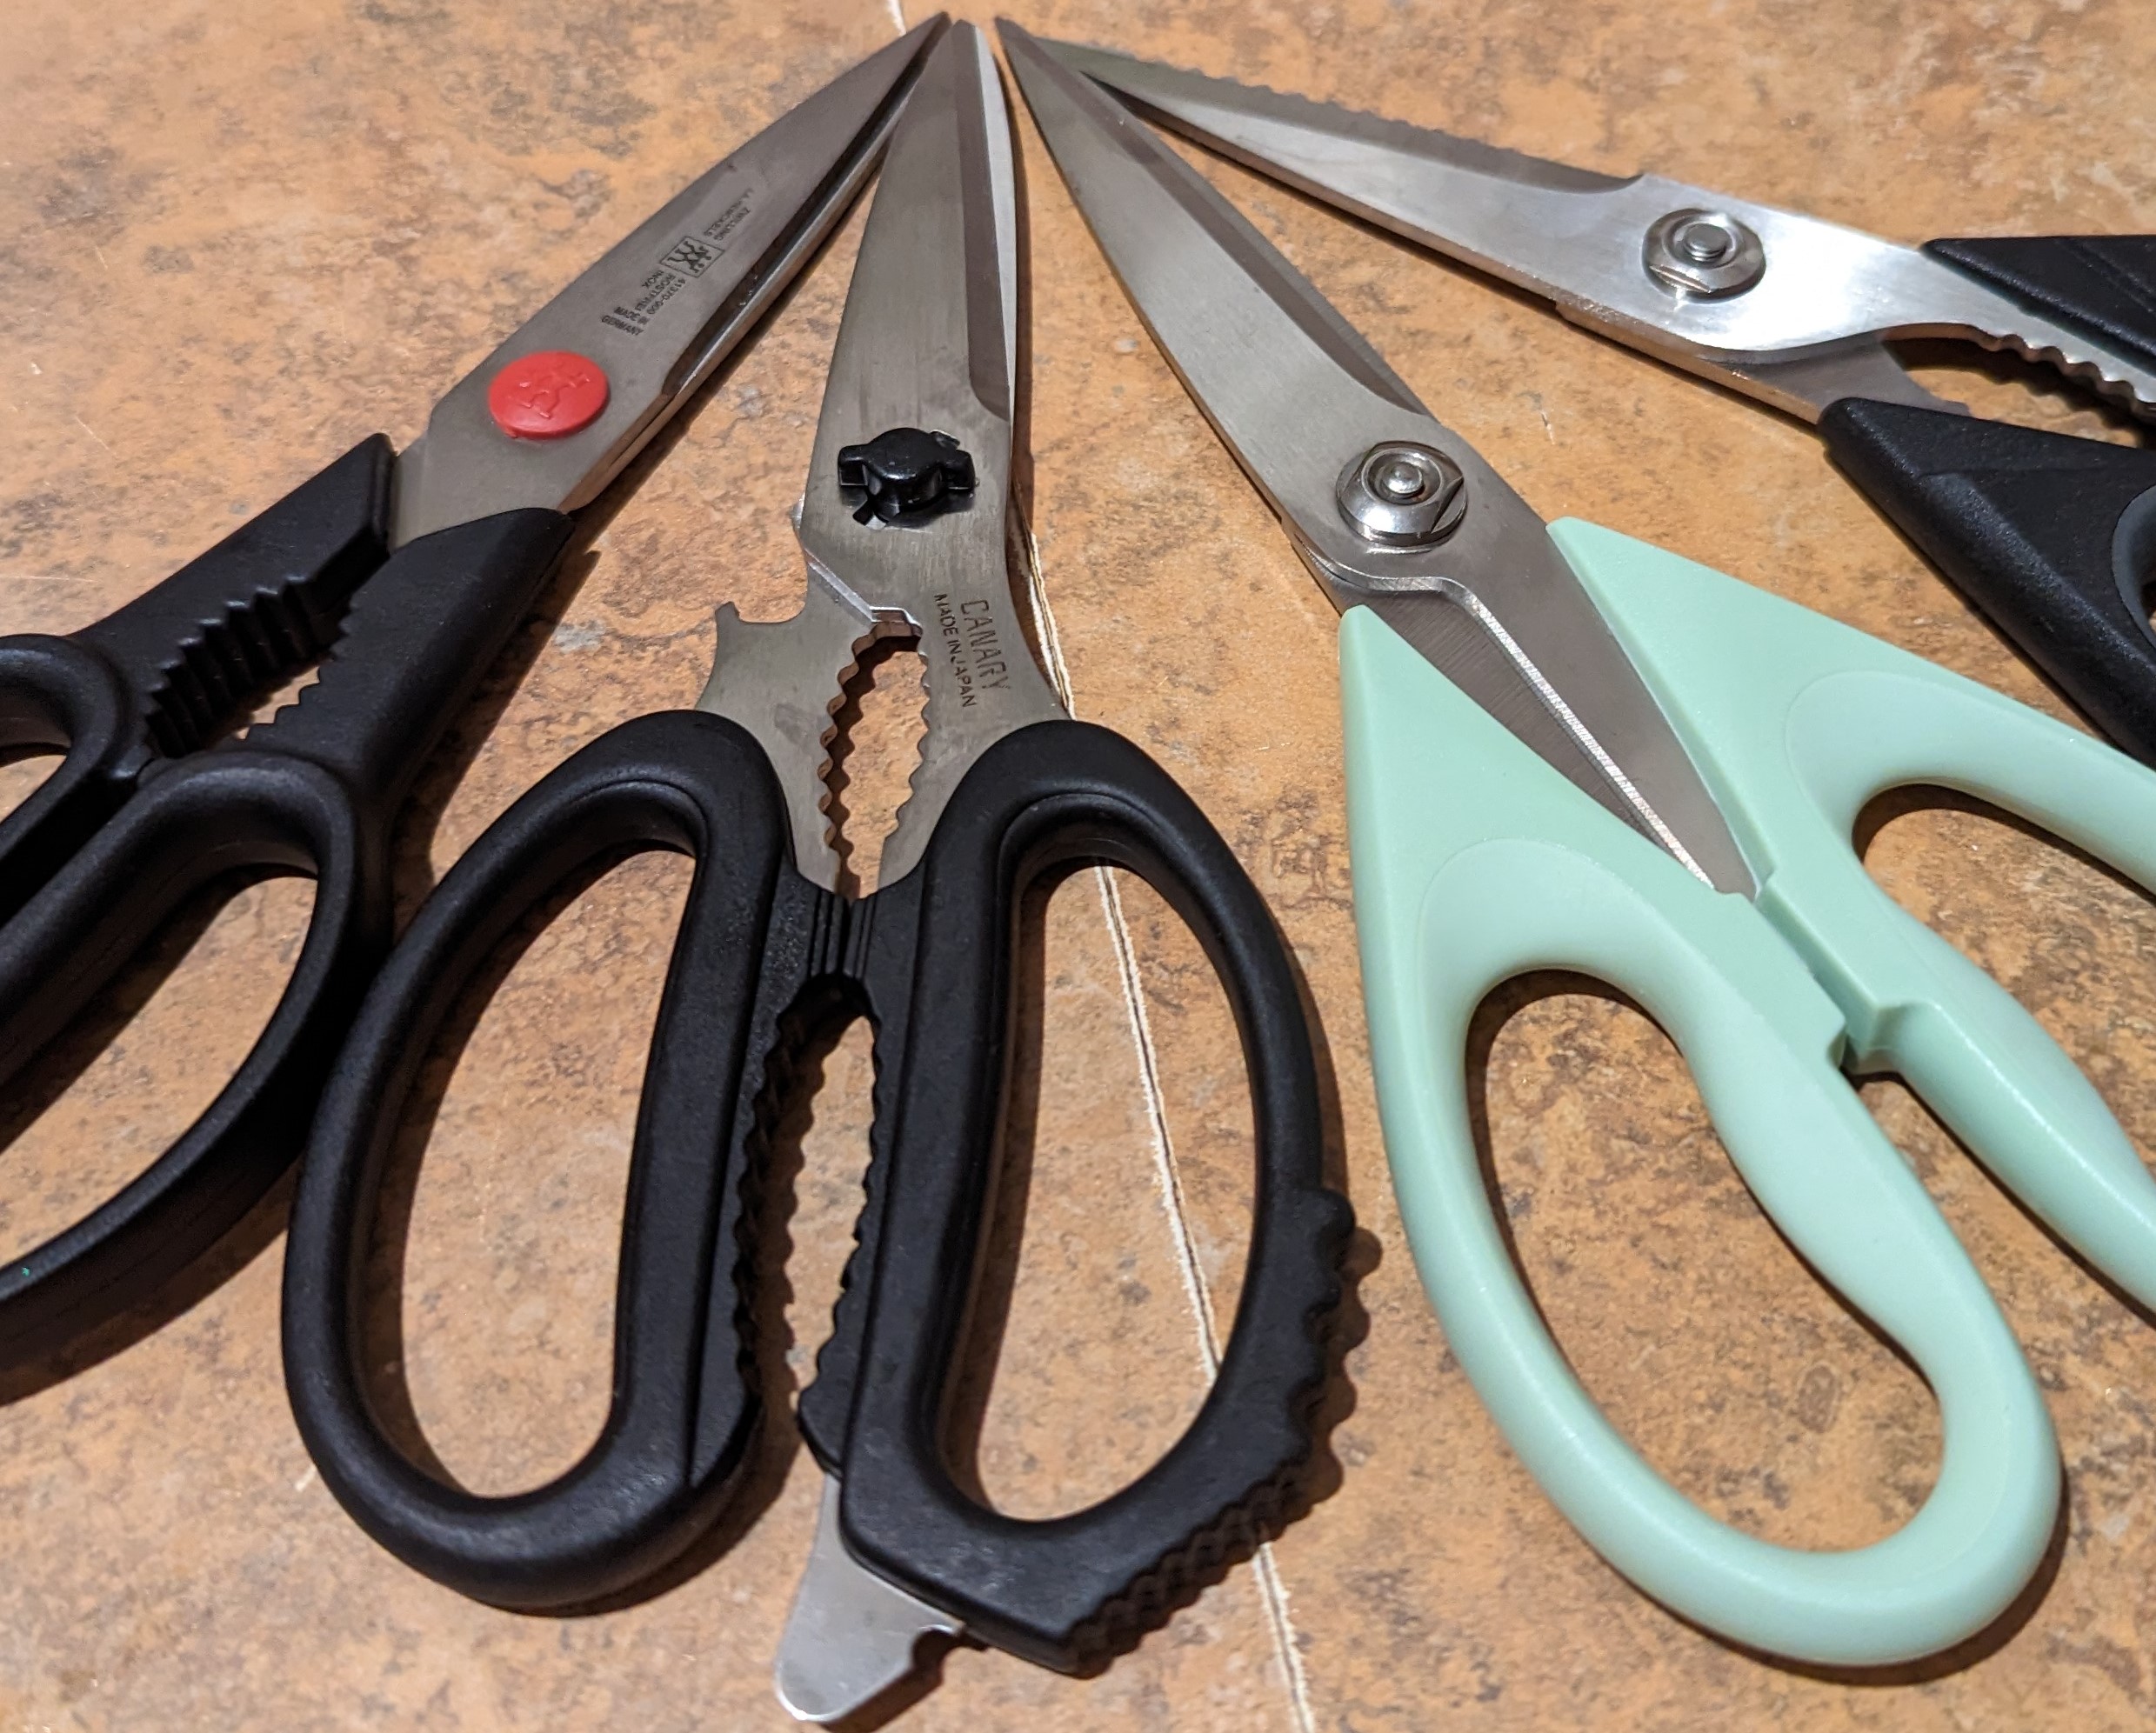 Four scissors on a countertop